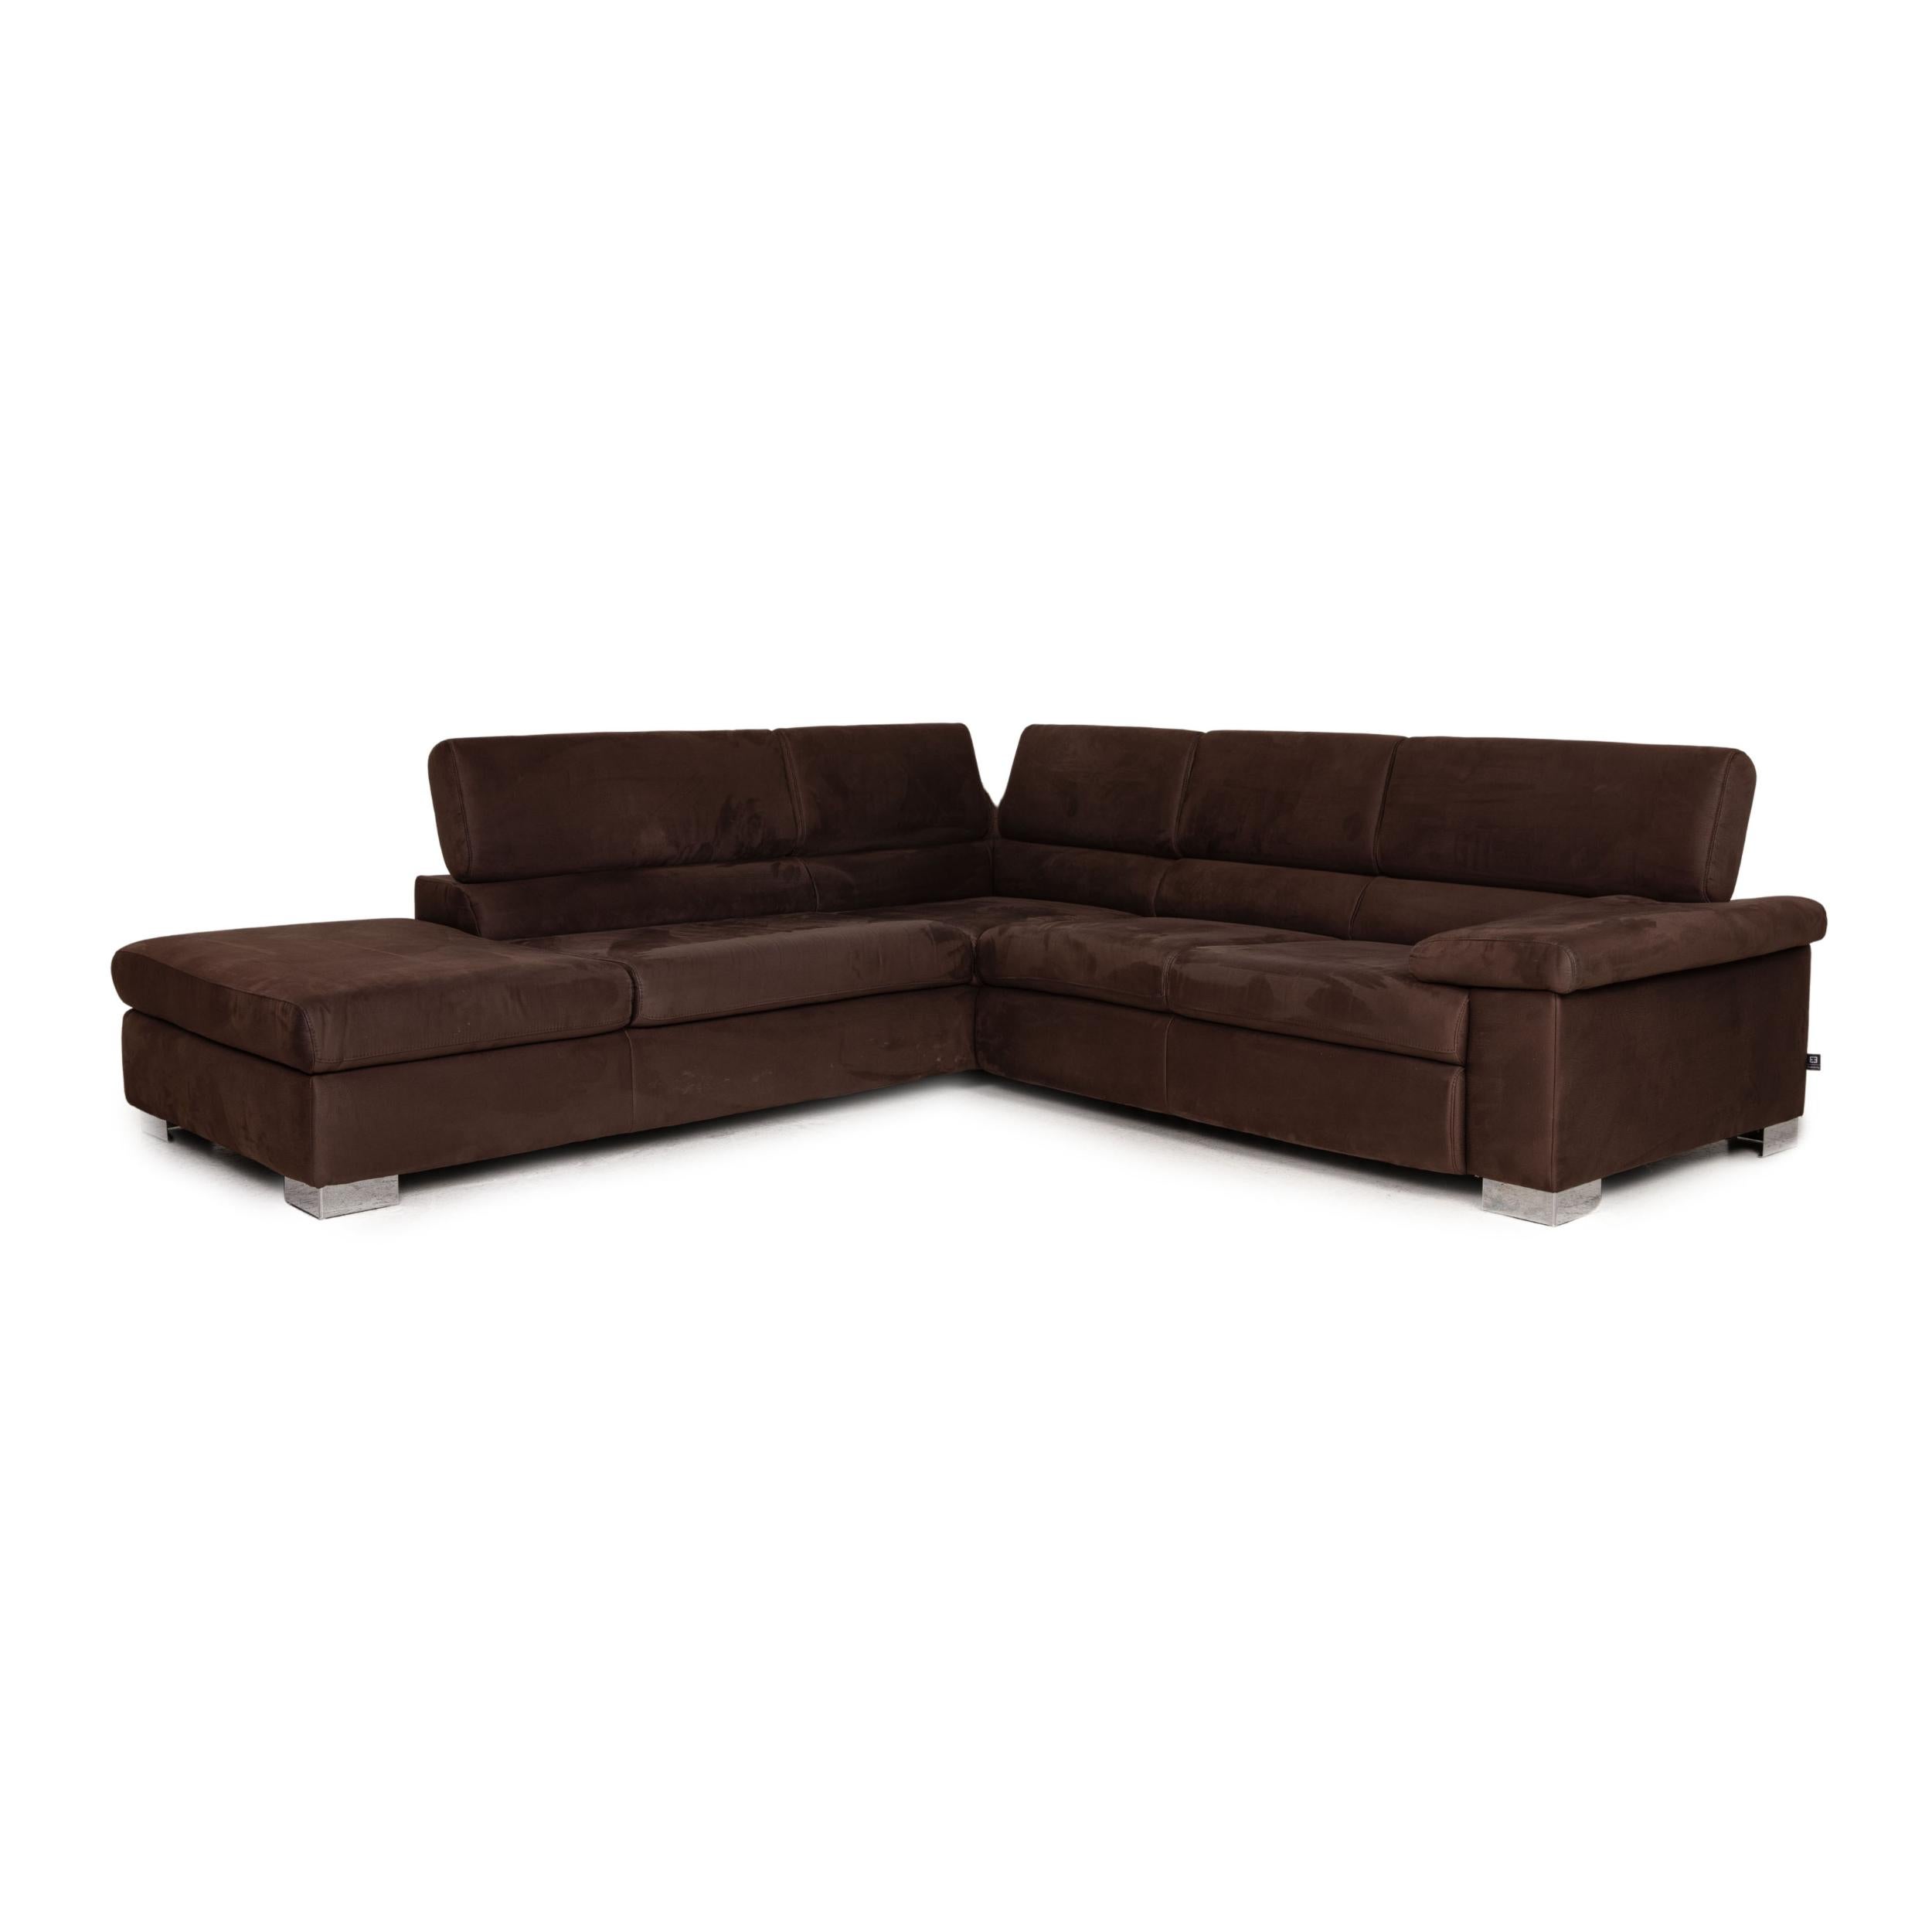 Modern Ewald Schillig Leather Sofa Brown Corner Sofa Function Couch For Sale